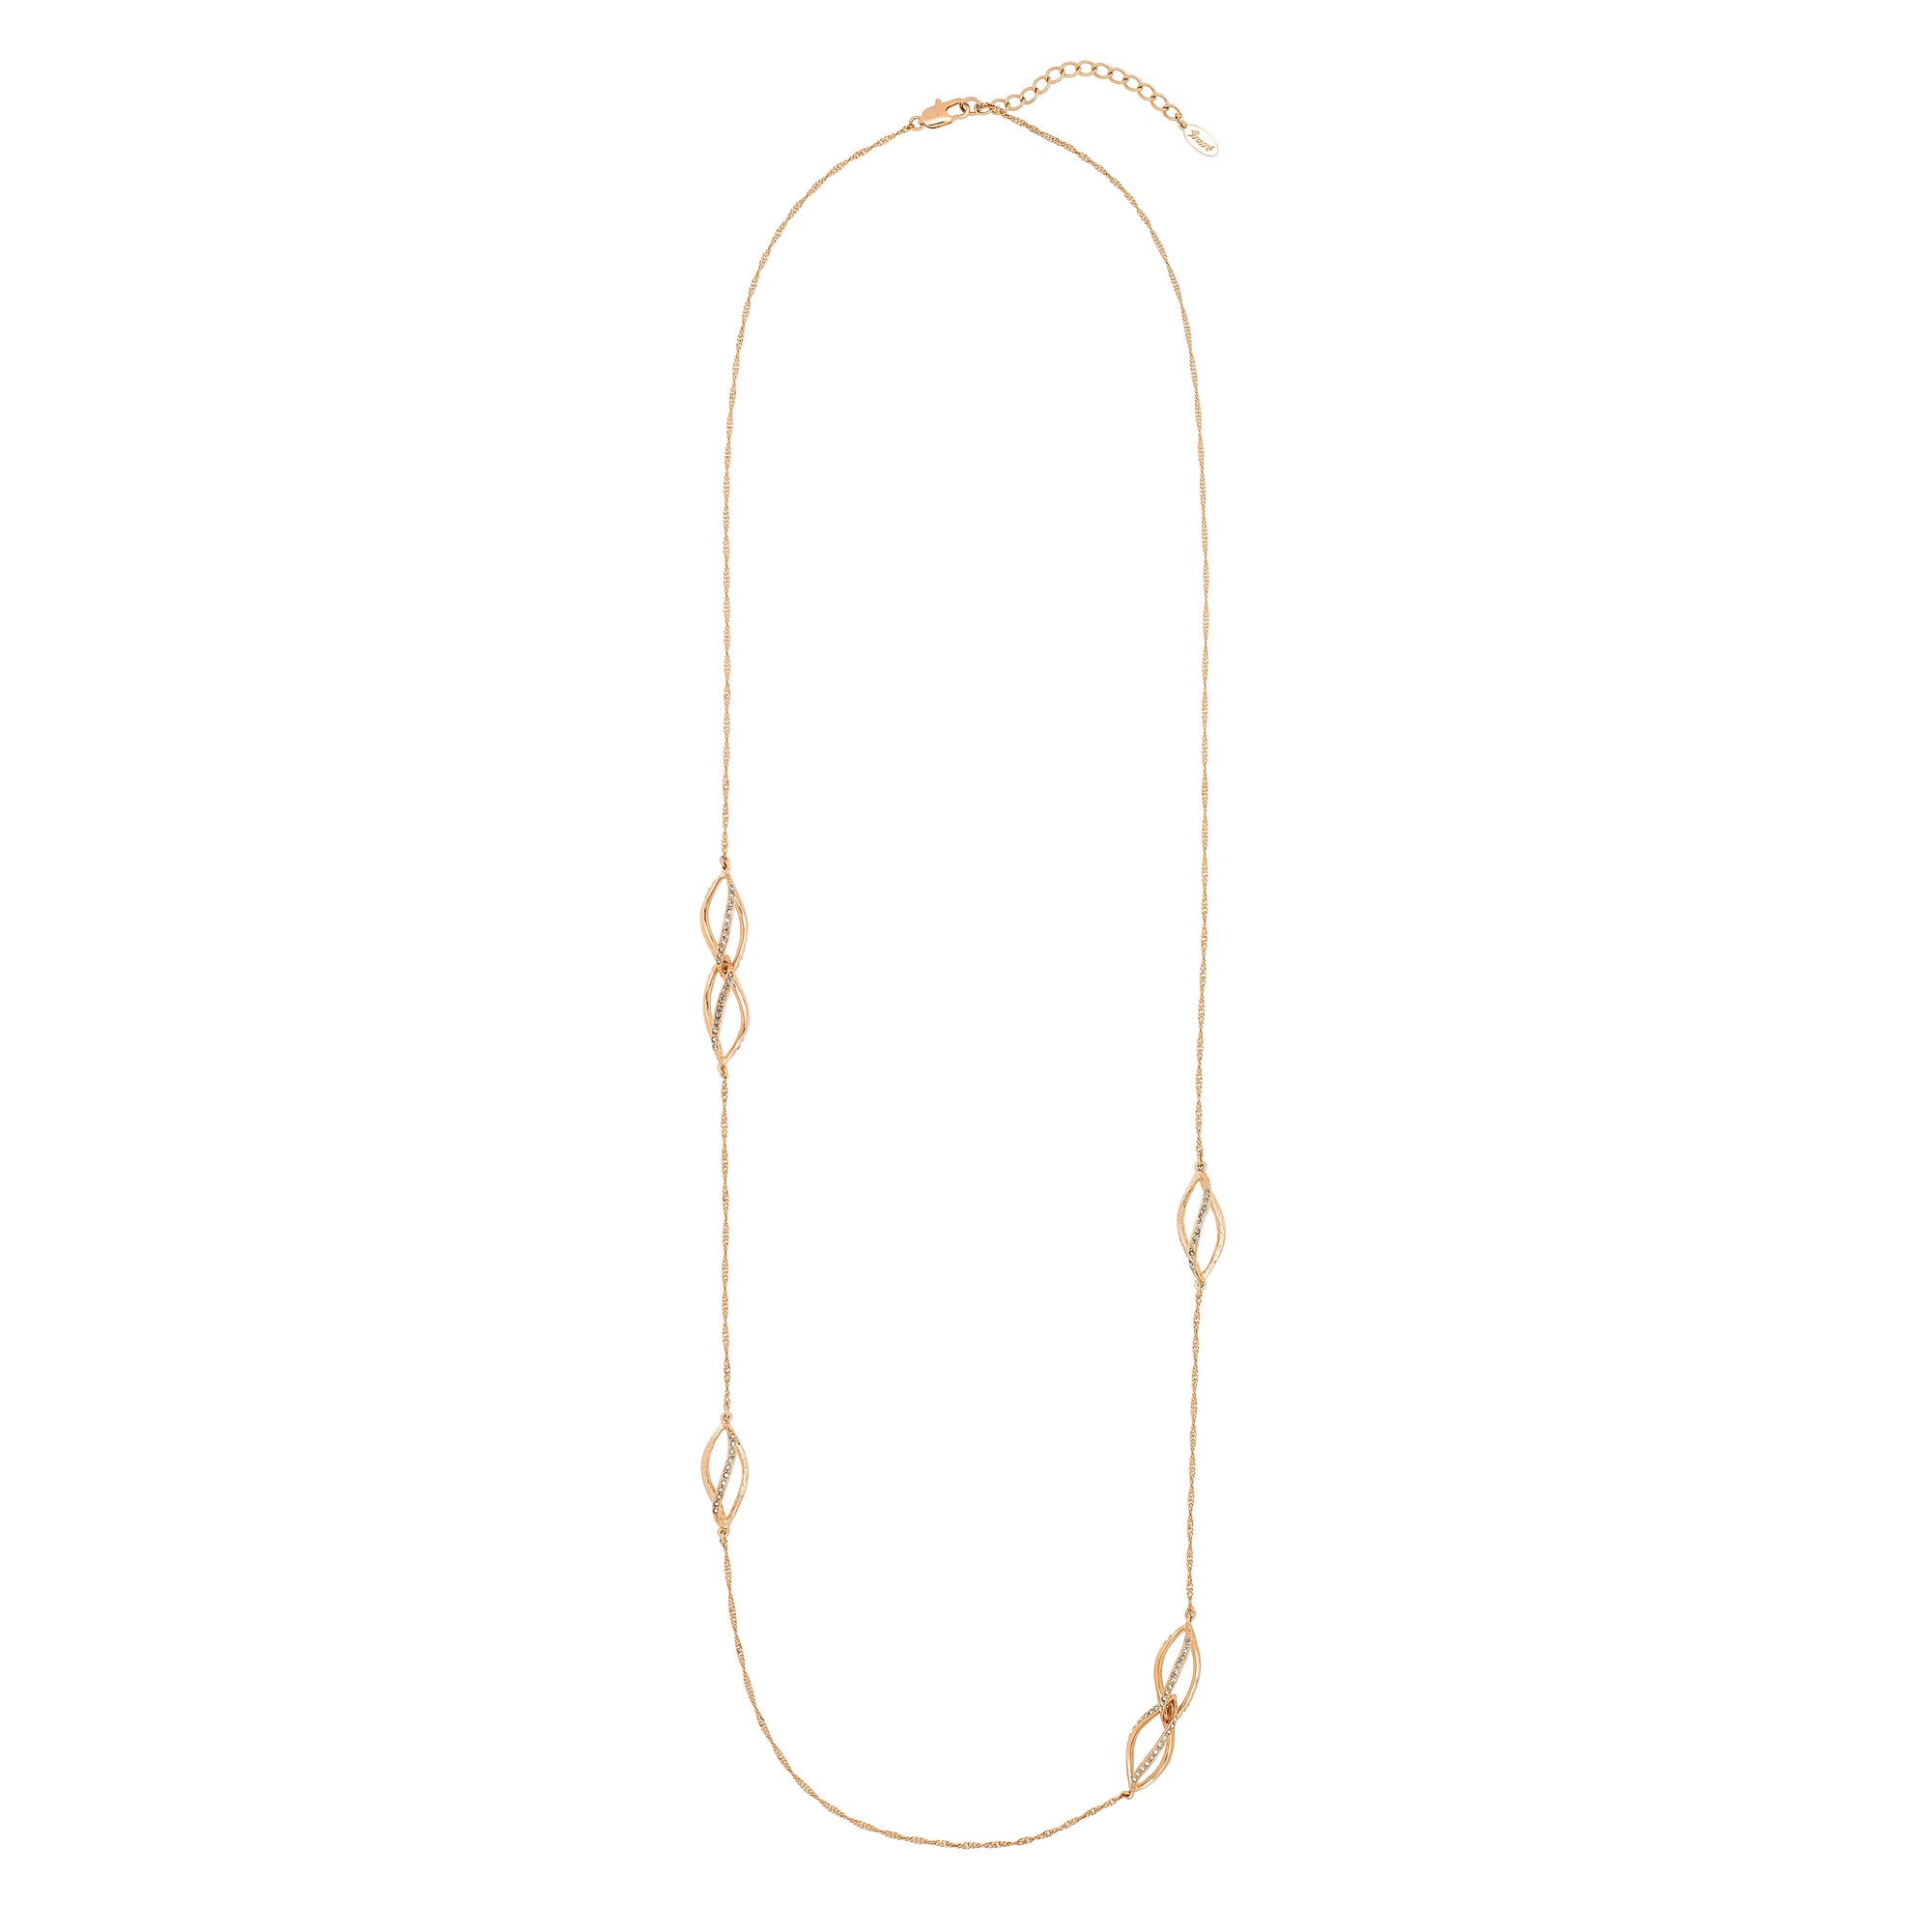 Azir long necklace